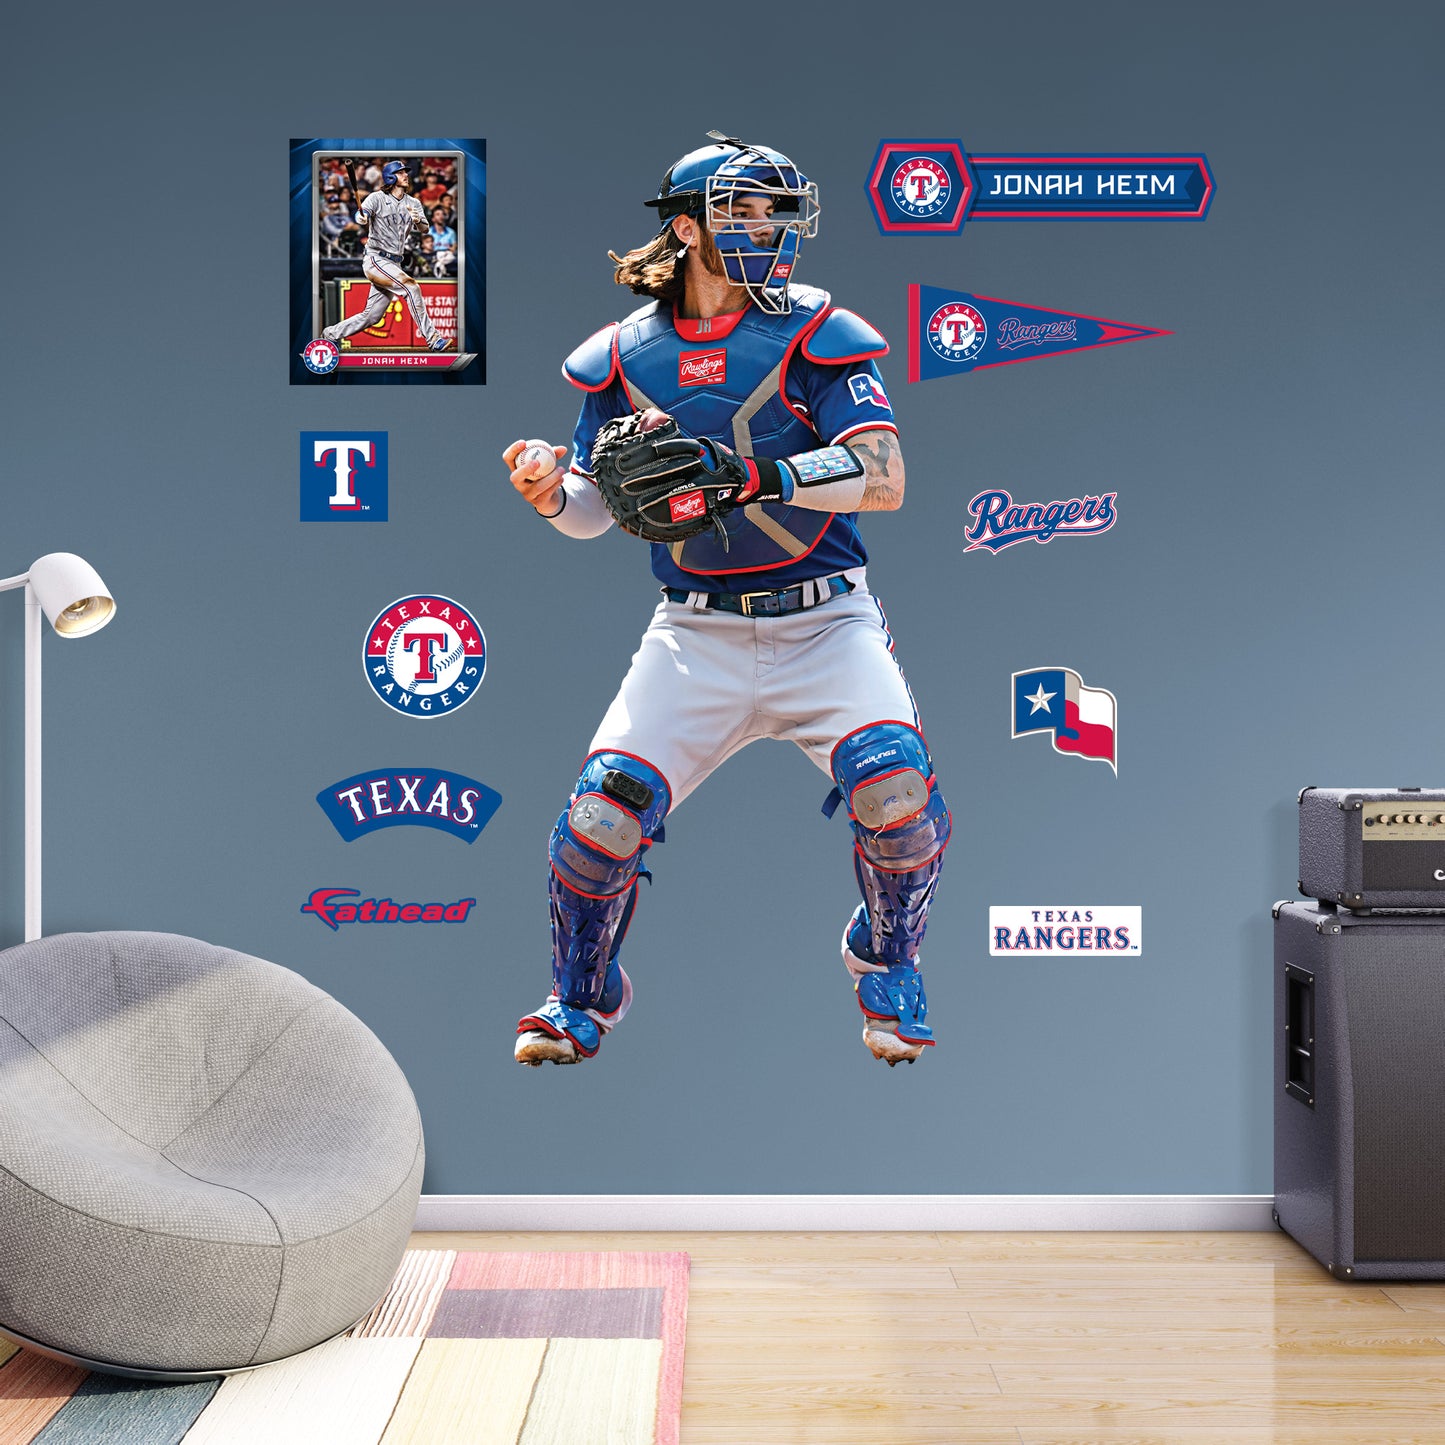 Texas Rangers: Jonah Heim         - Officially Licensed MLB Removable     Adhesive Decal